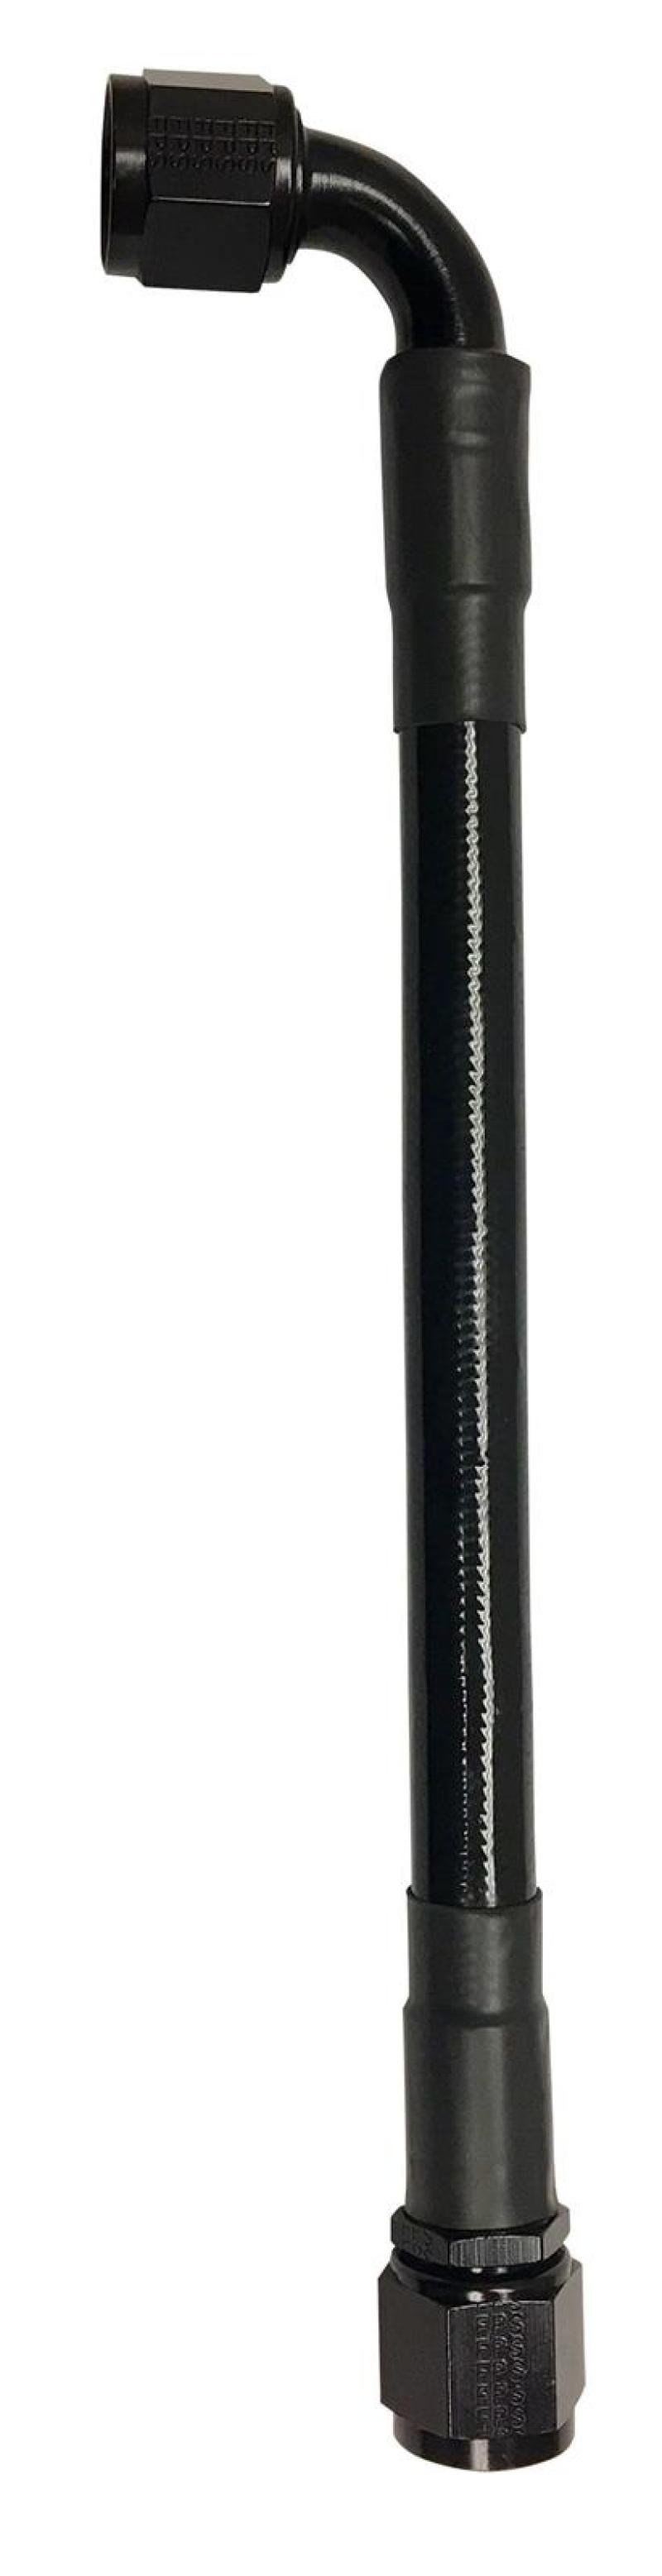 Fragola -6AN Ext Black PTFE Hose Assembly Straight x 90 Degree 24in - 6026-1-2-24BL